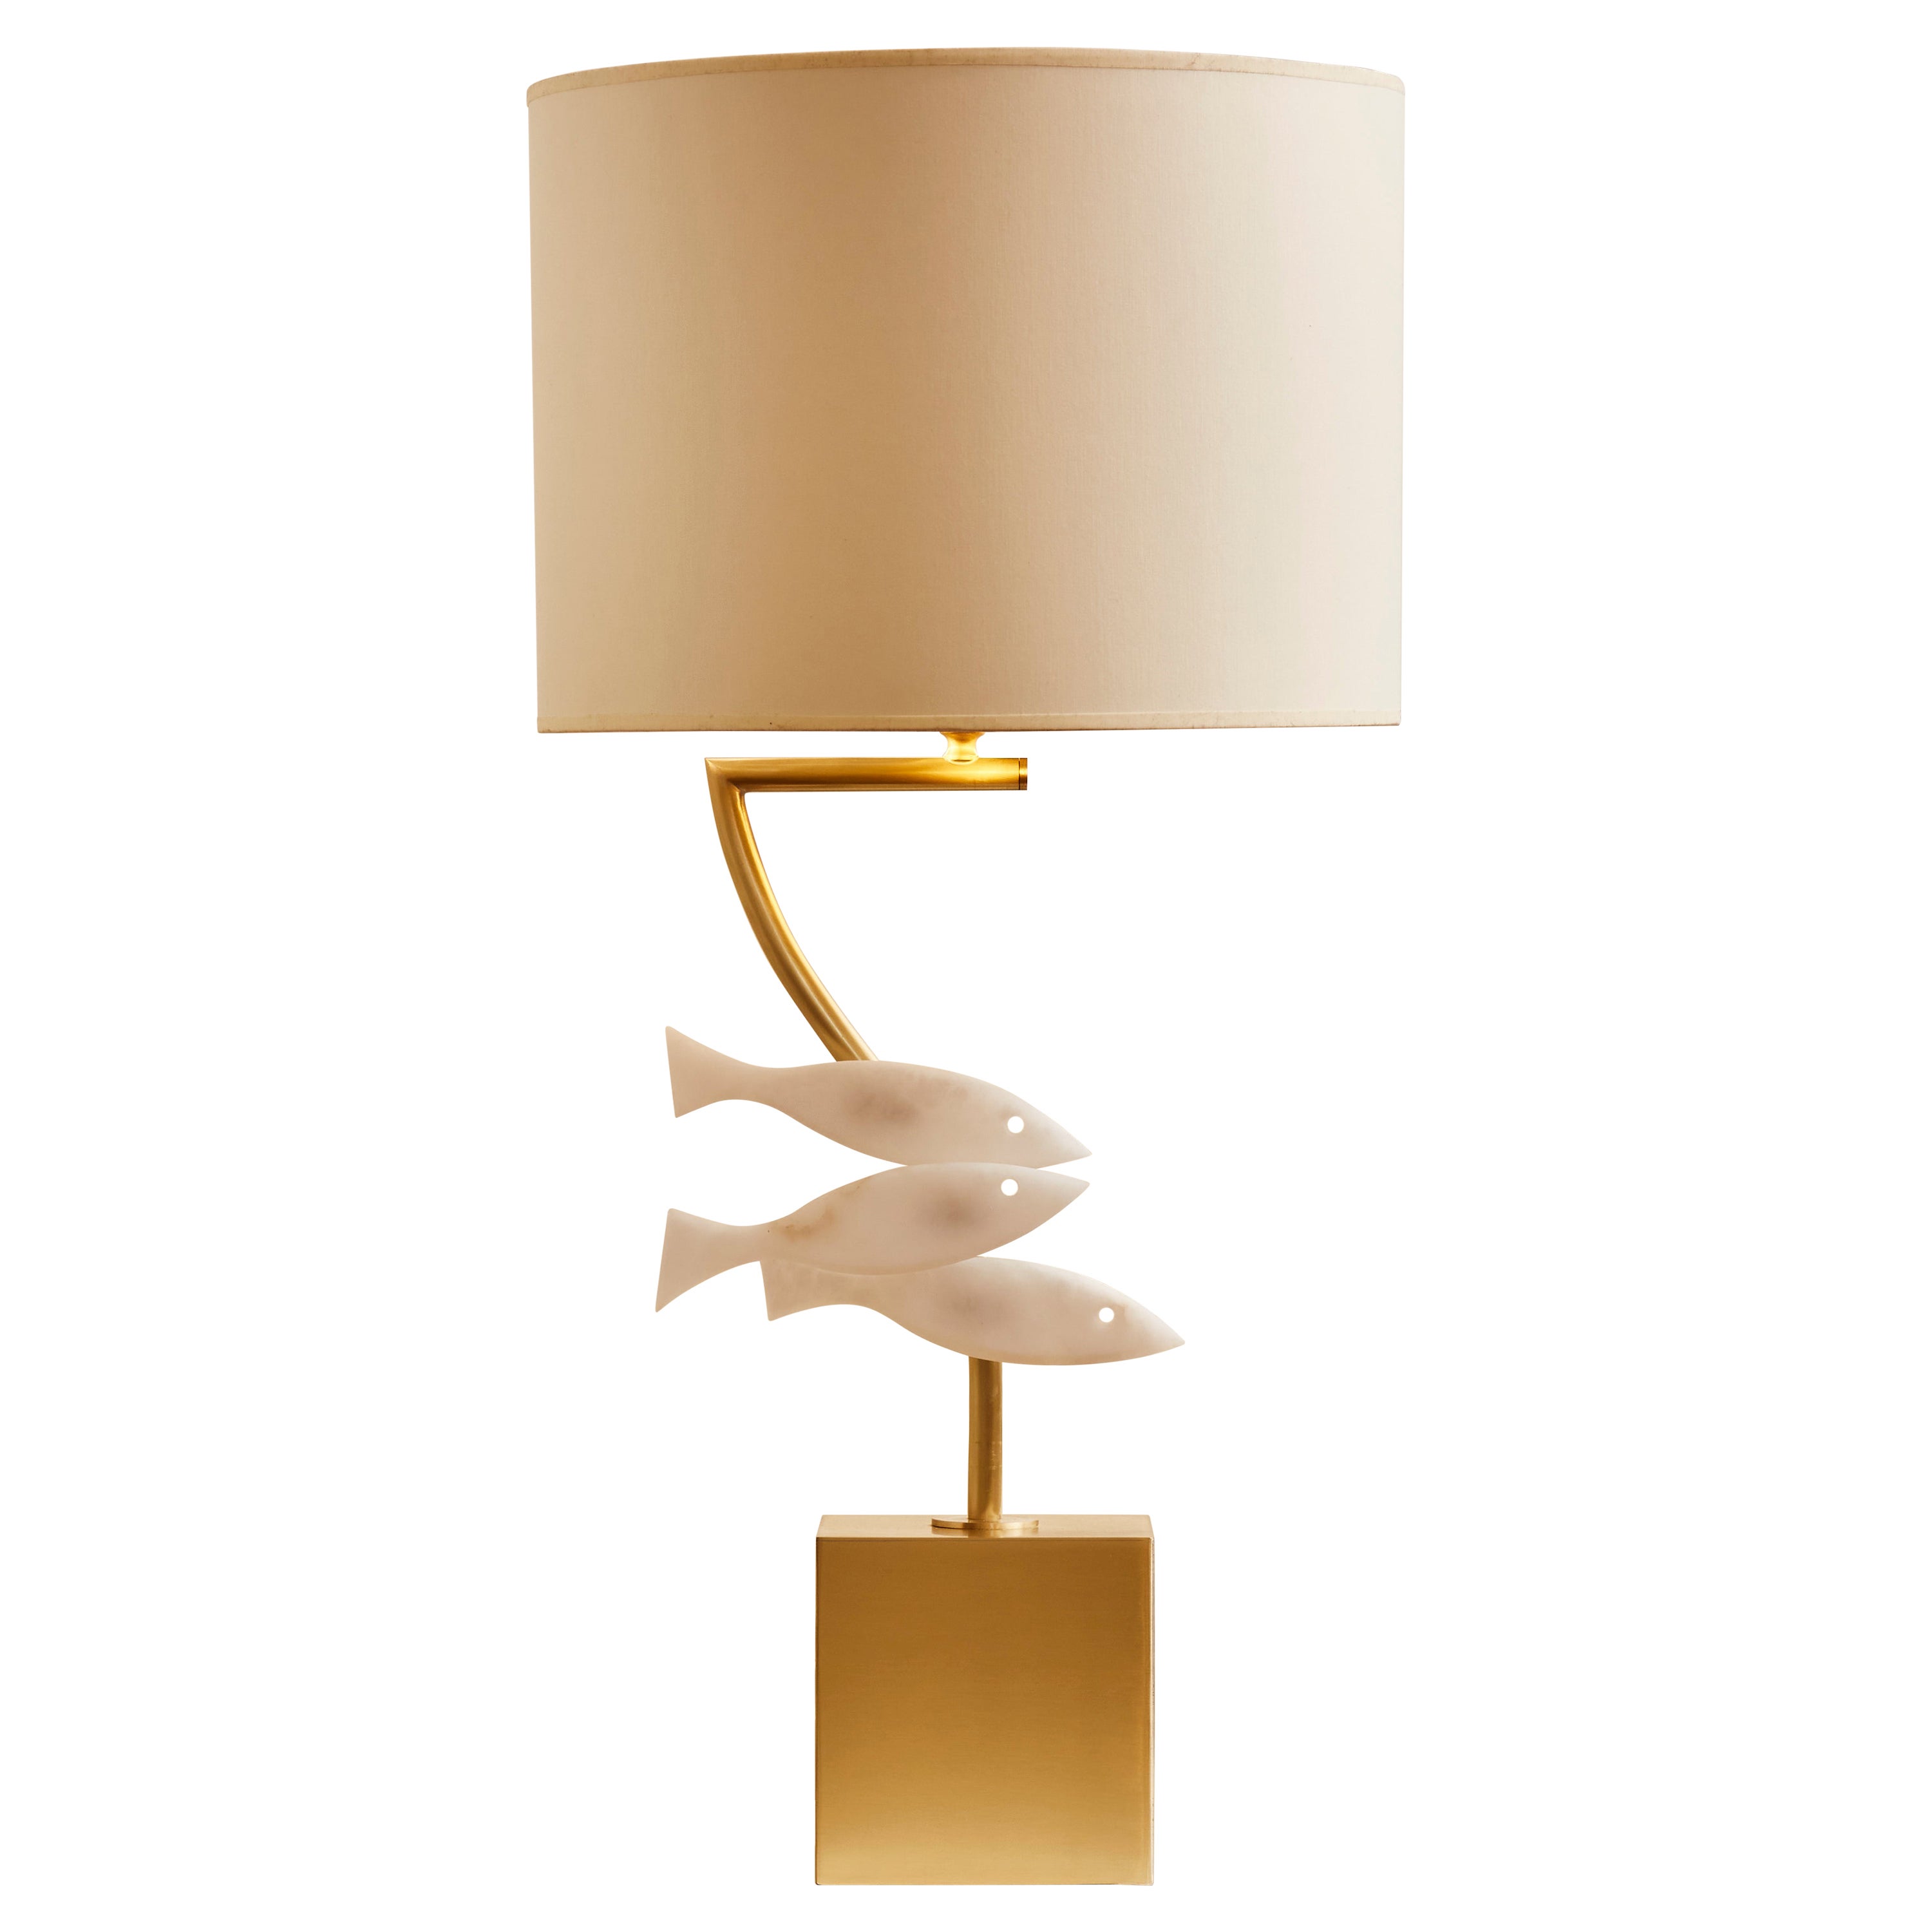 "Fish" Table Lamp by Studio Glustin For Sale